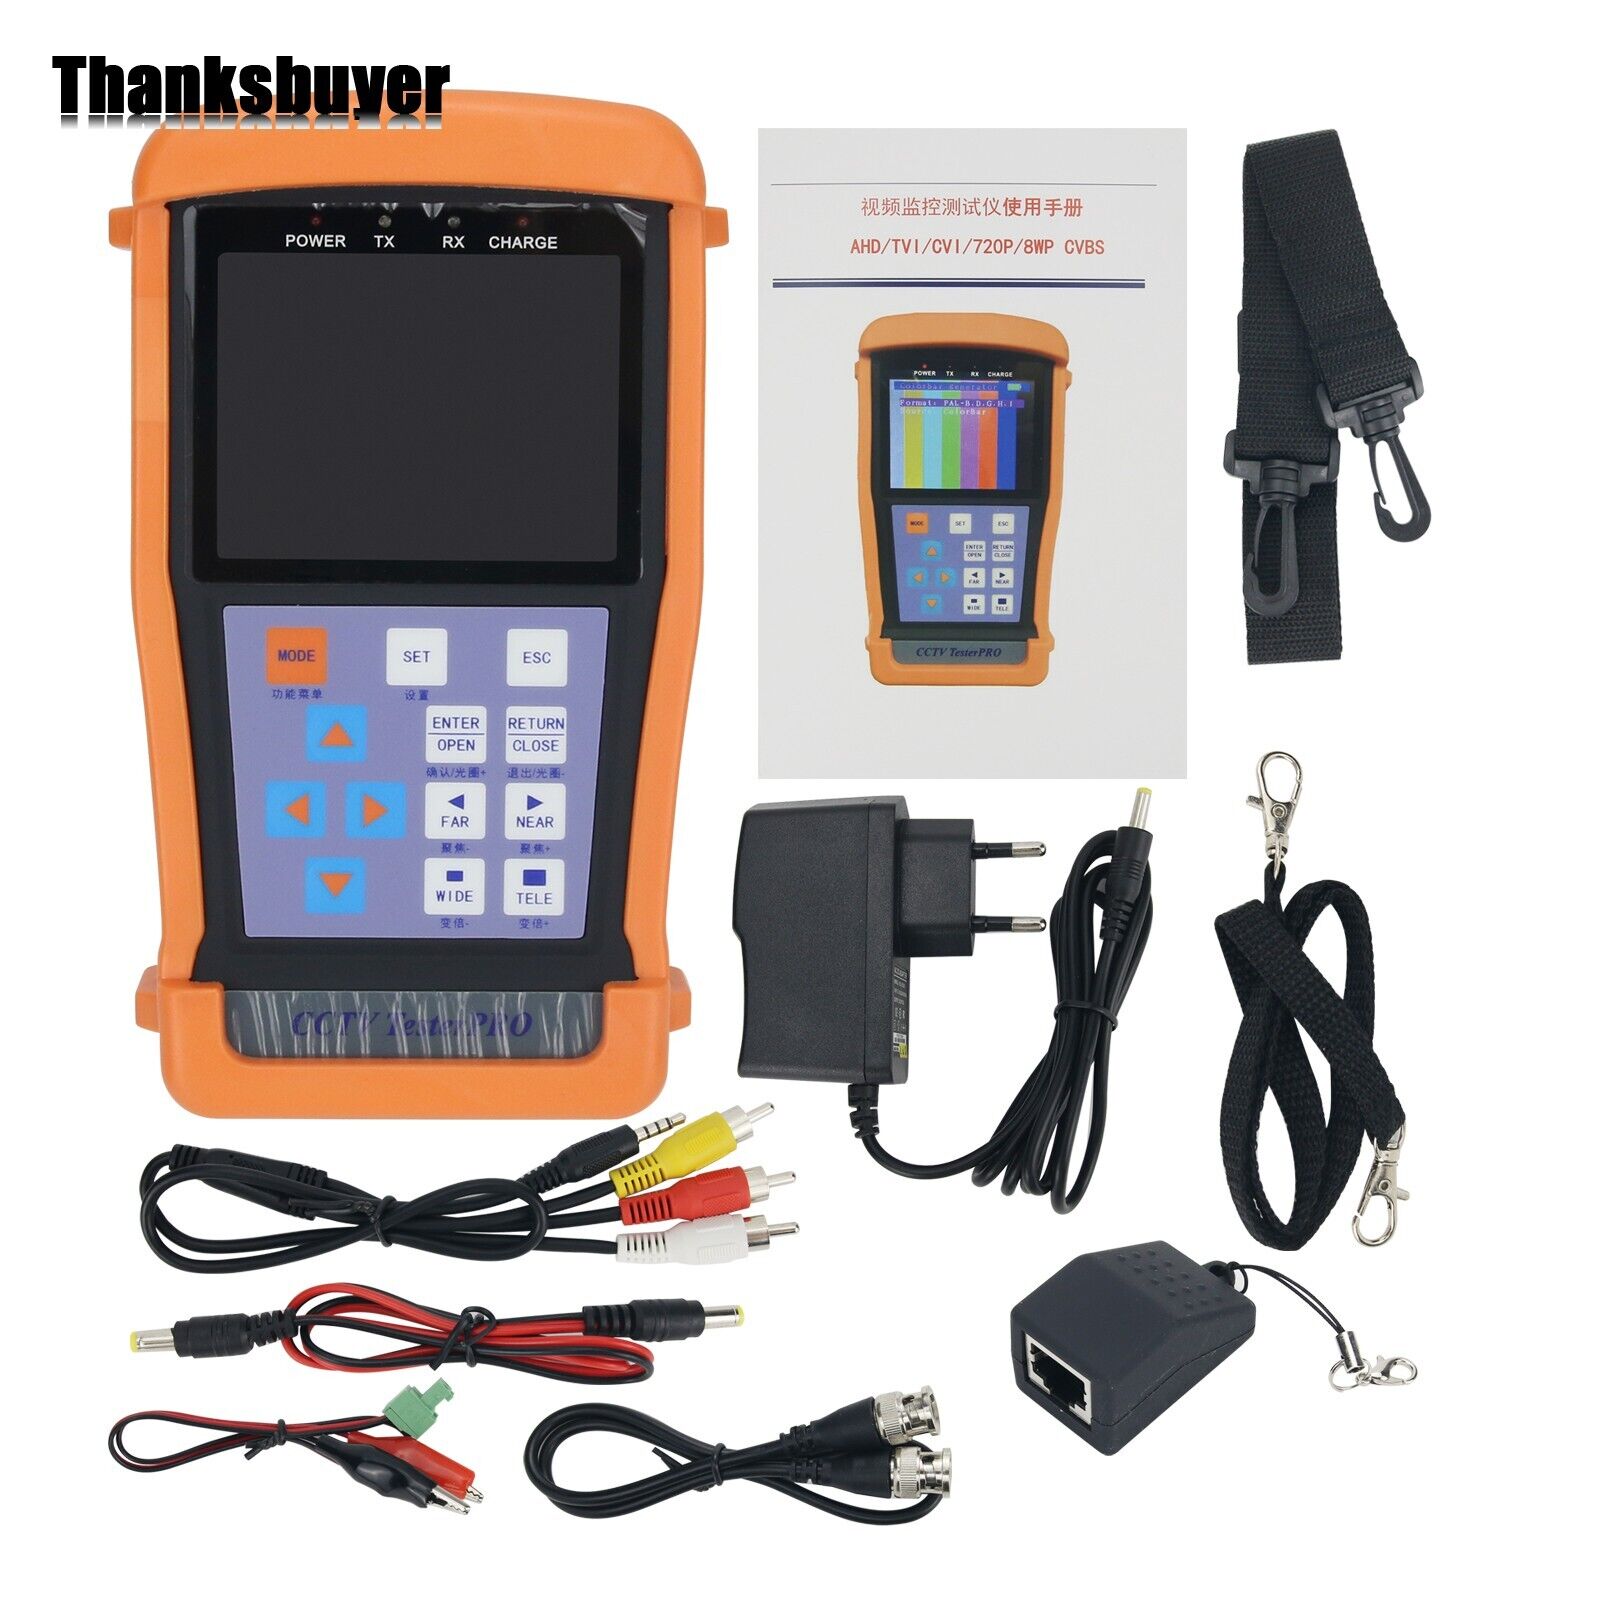 Te-300 Cctv Tester Pro Ipc Tester 3.5" Lcd Rs485 Ptz Control For Analog Cameras